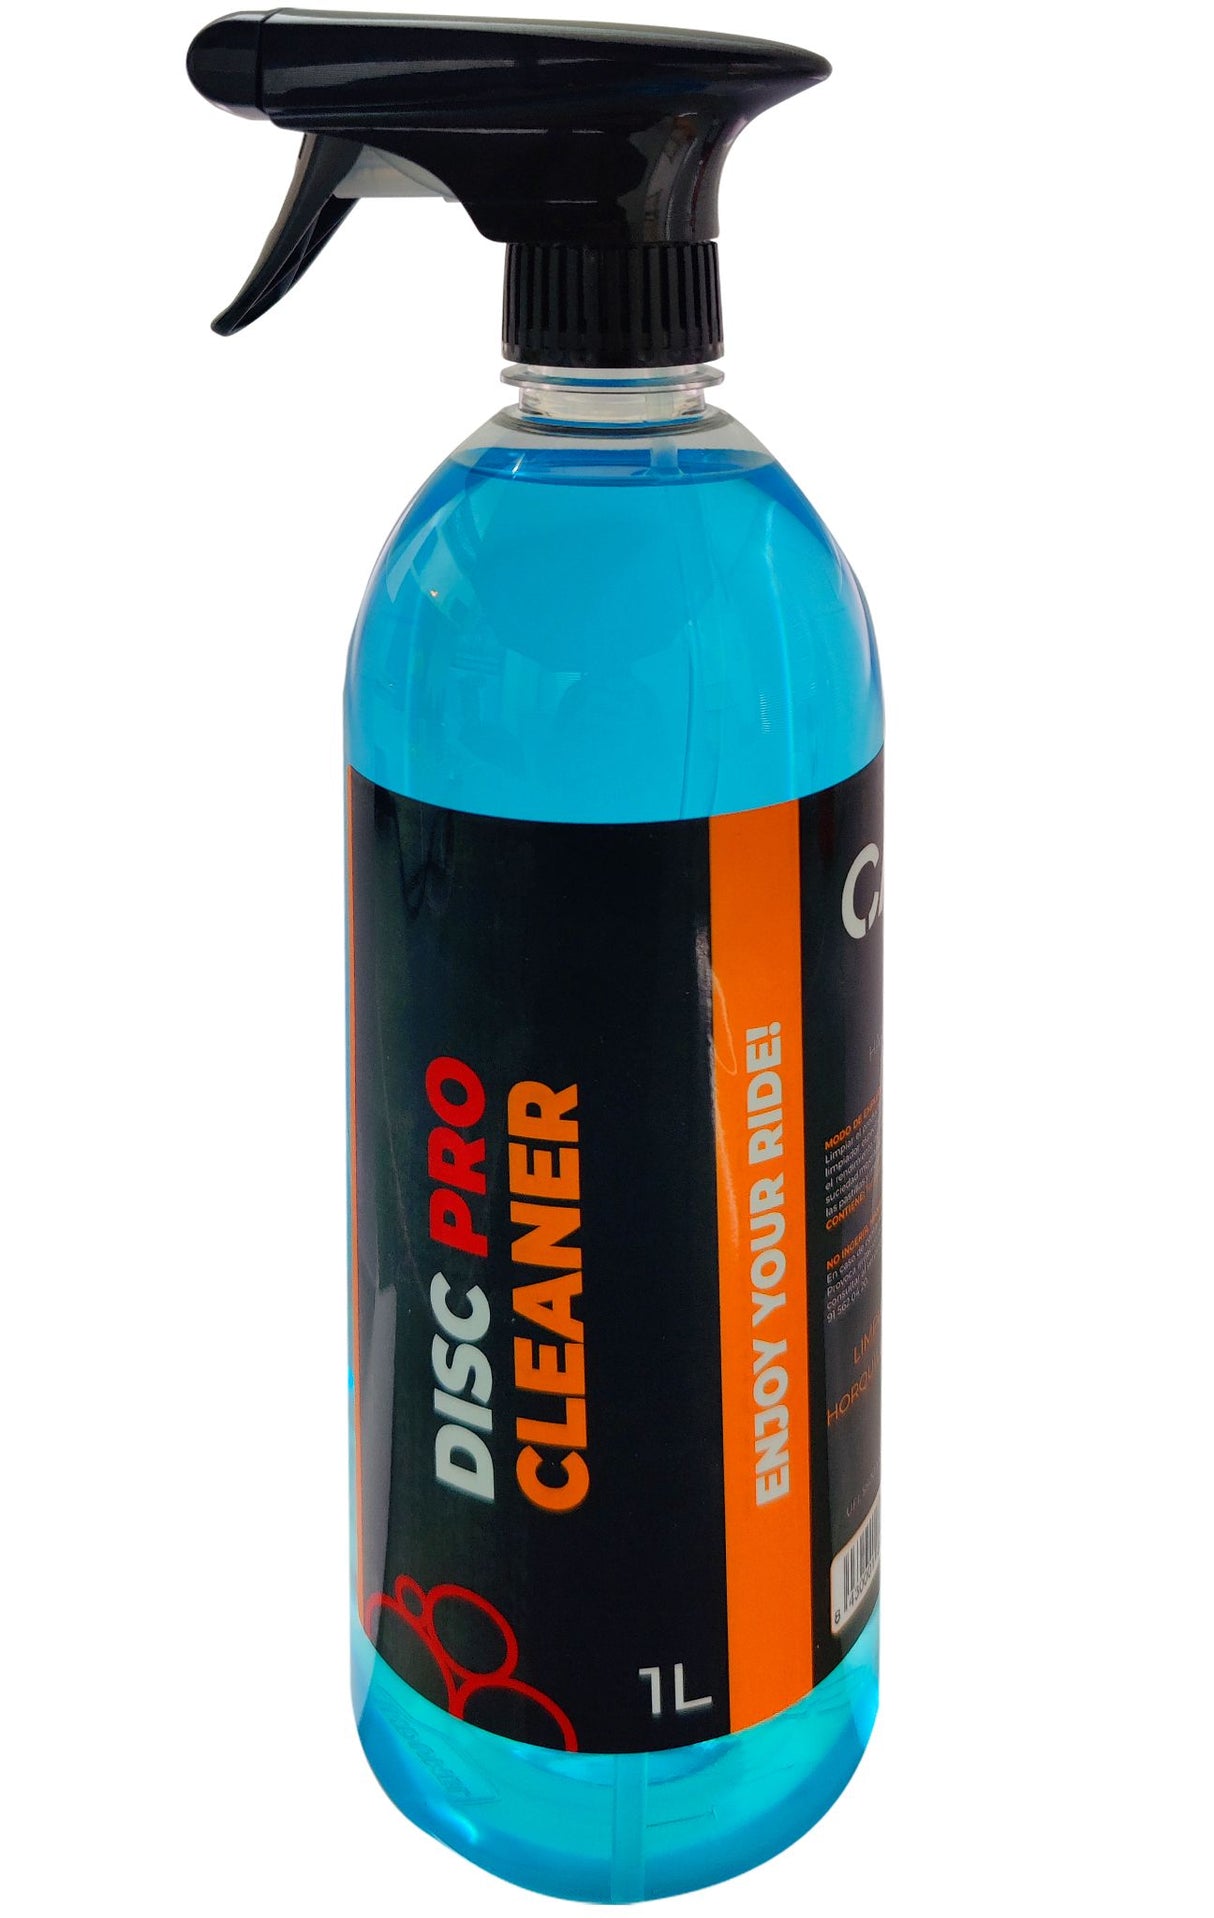 Disc Pro Cleaner